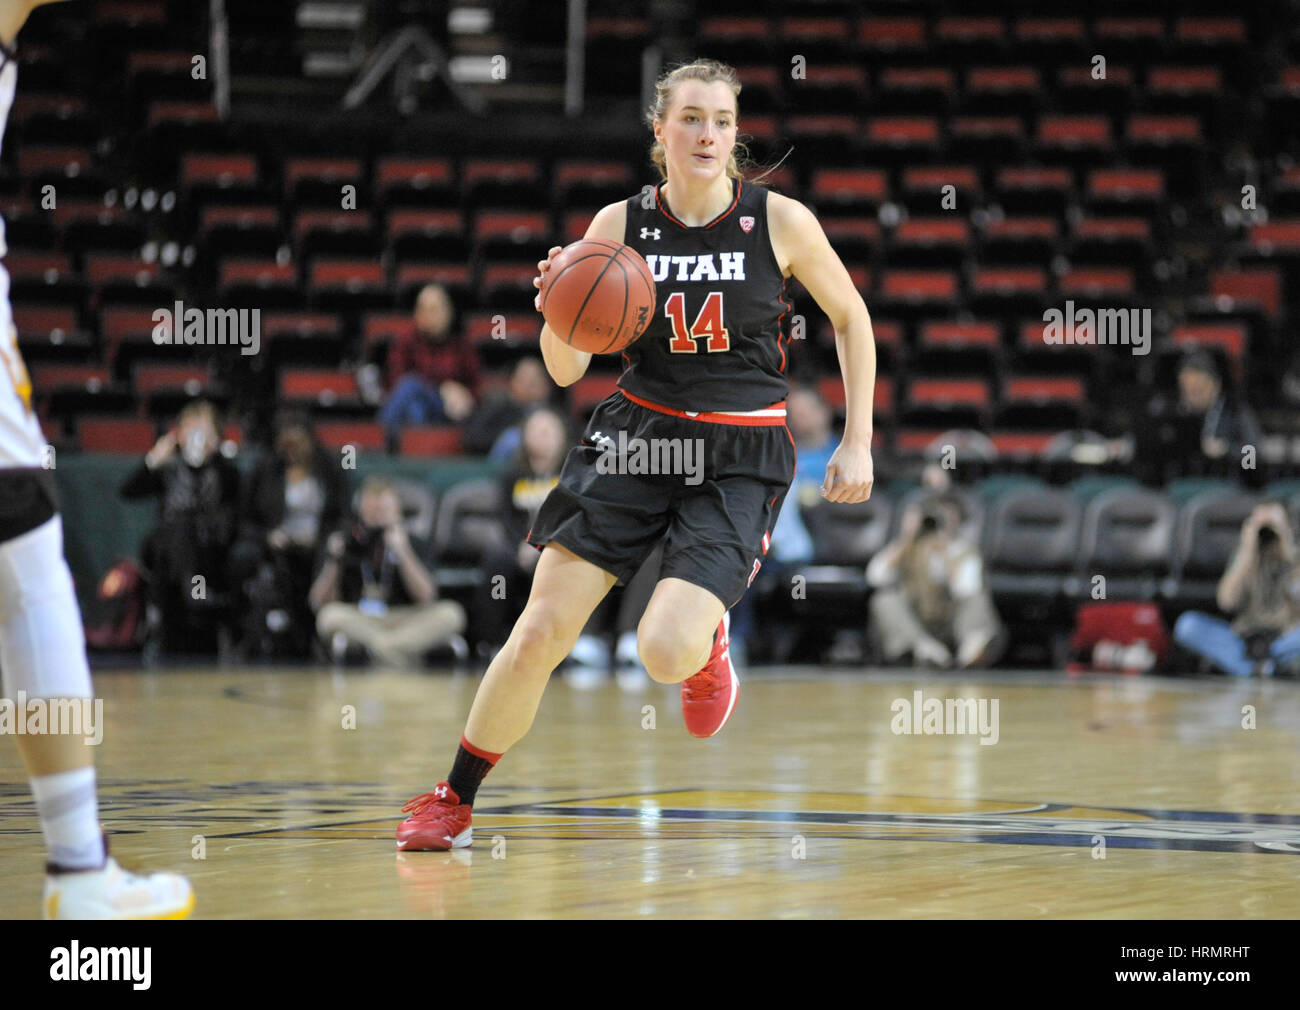 Seattle, WA, USA. 2nd Mar, 2017. Utahs Paige Crozon (14) in action during a PAC12 women's tournament game between the Utah Utes and the Arizona State Sun Devils. The game was played at Key Arena in Seattle, WA. Jeff Halstead/CSM/Alamy Live News Stock Photo